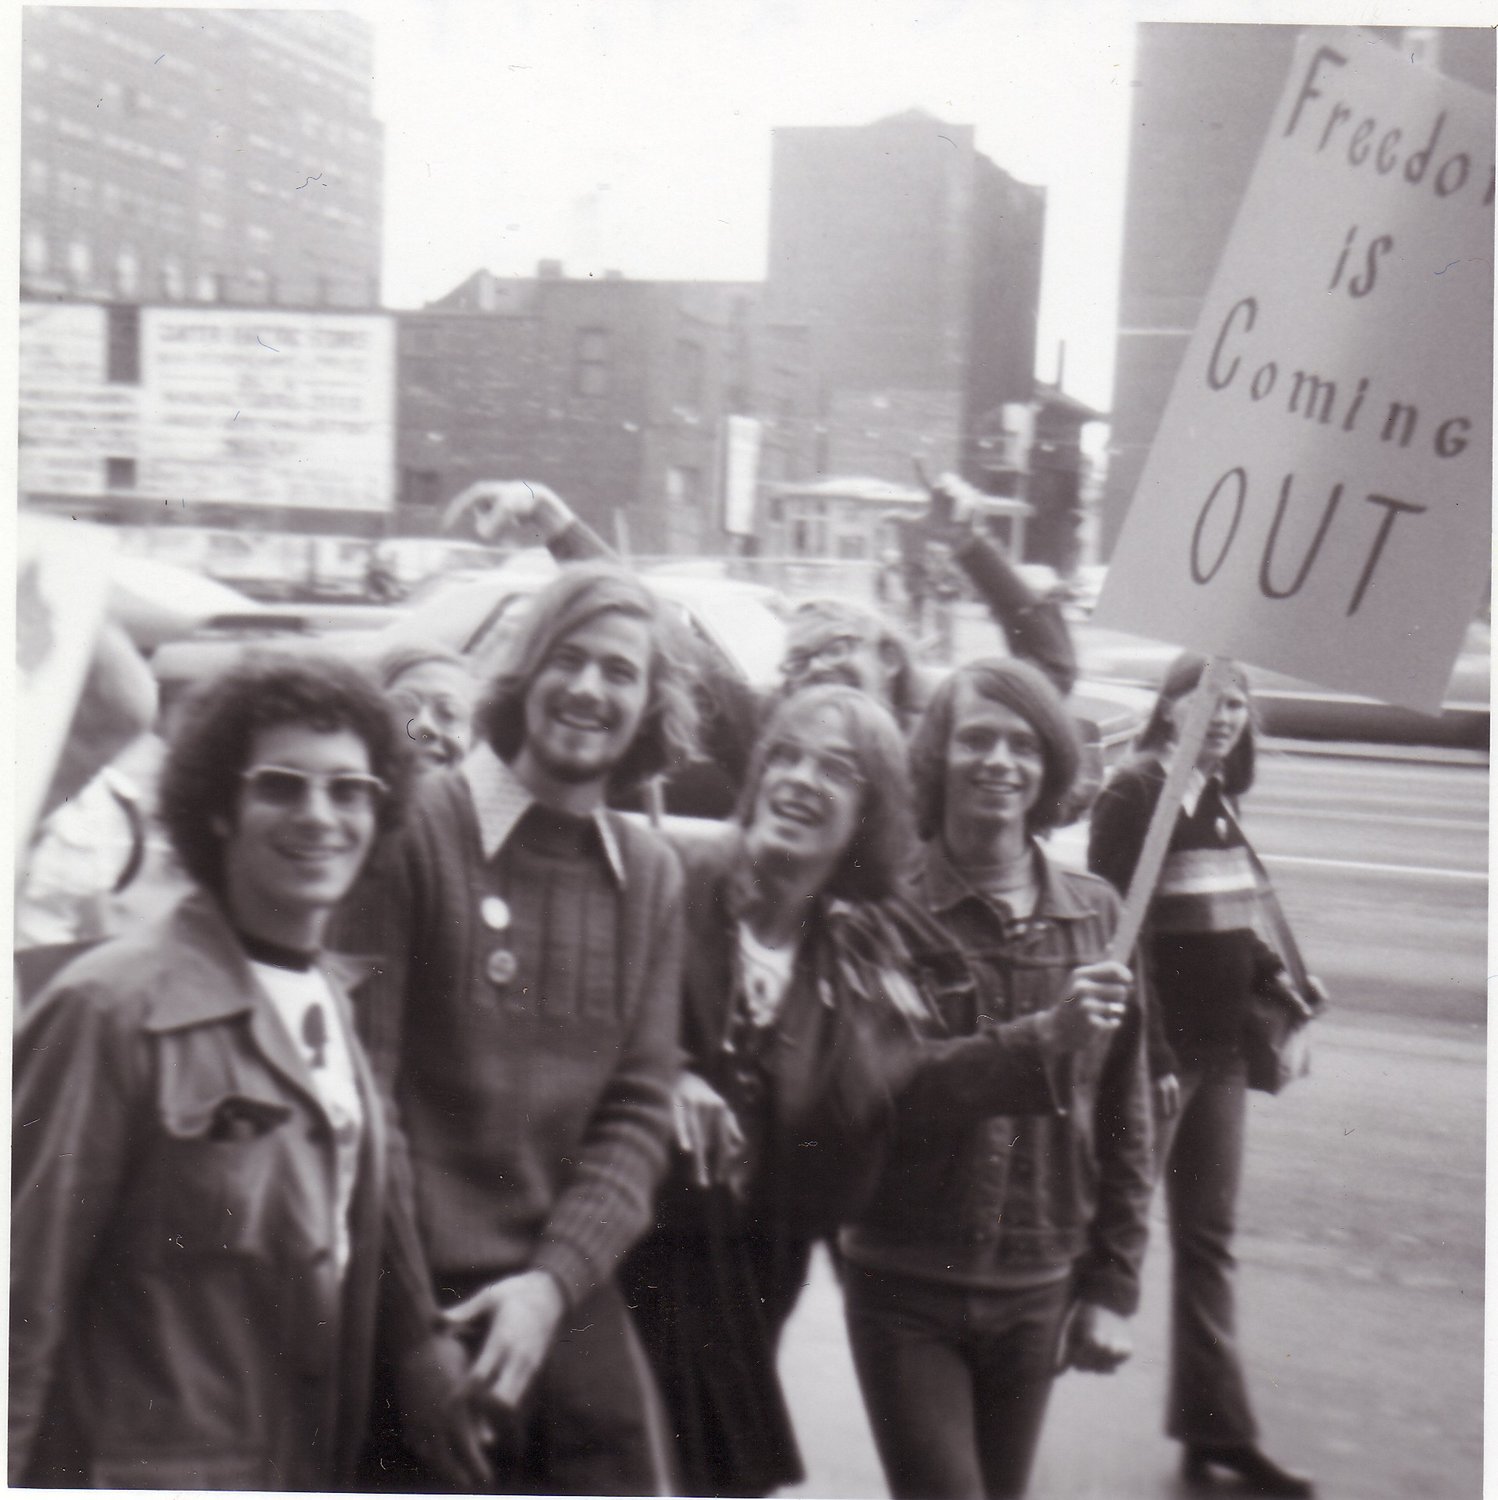 Members of the Michigan State University Gay Liberation Movement Leonard Graff, Michael Christianson, Alex McGehee, Orville Hayes, and John Mathison take part in the Christopher Street Detroit ’72 march, June 24, 1972. Photo from Sunflower newspaper.